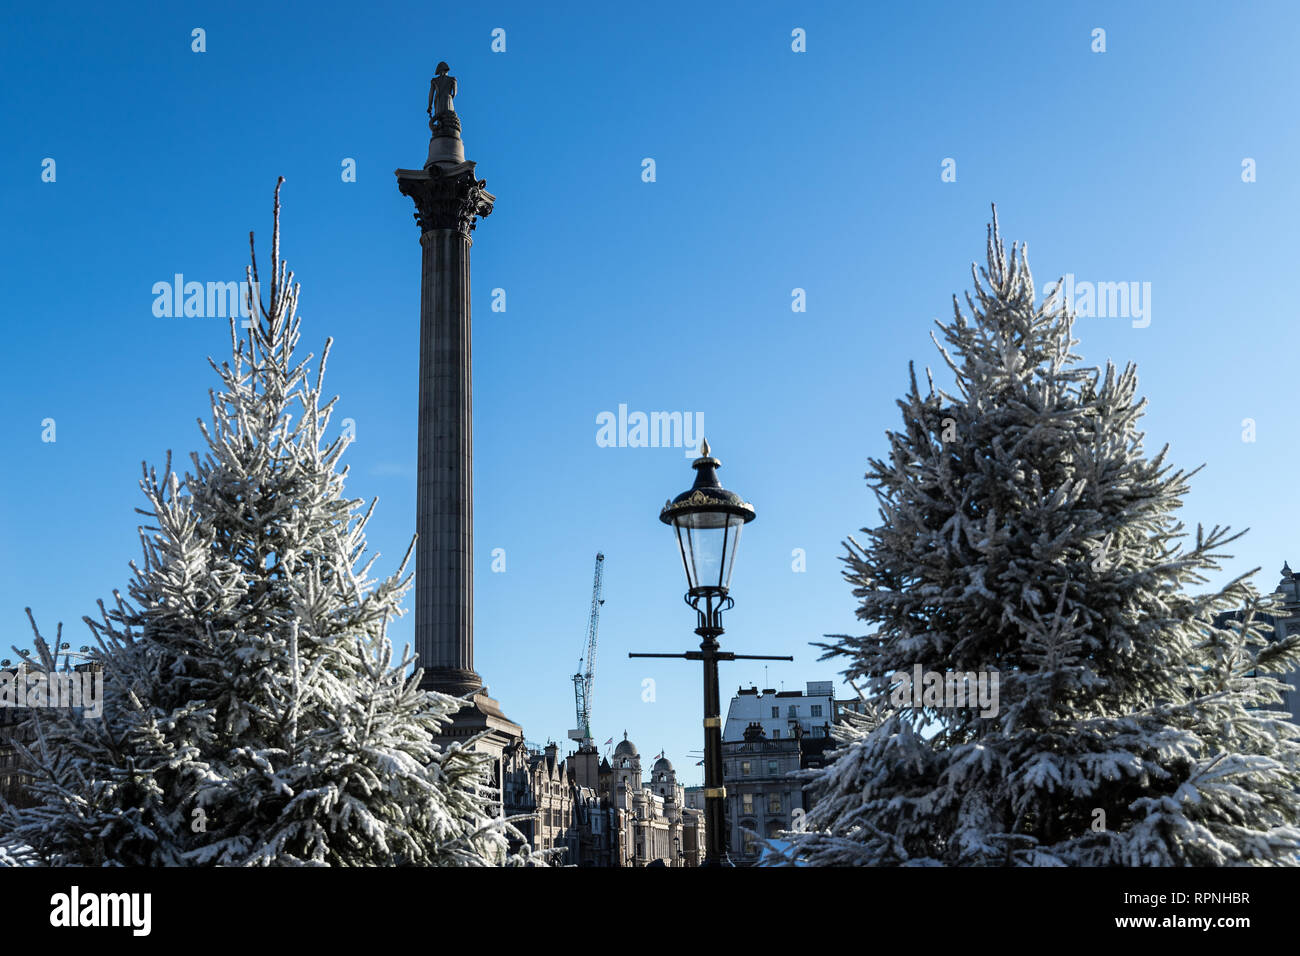 Snow and winter decorations in Trafalgar Square Stock Photo